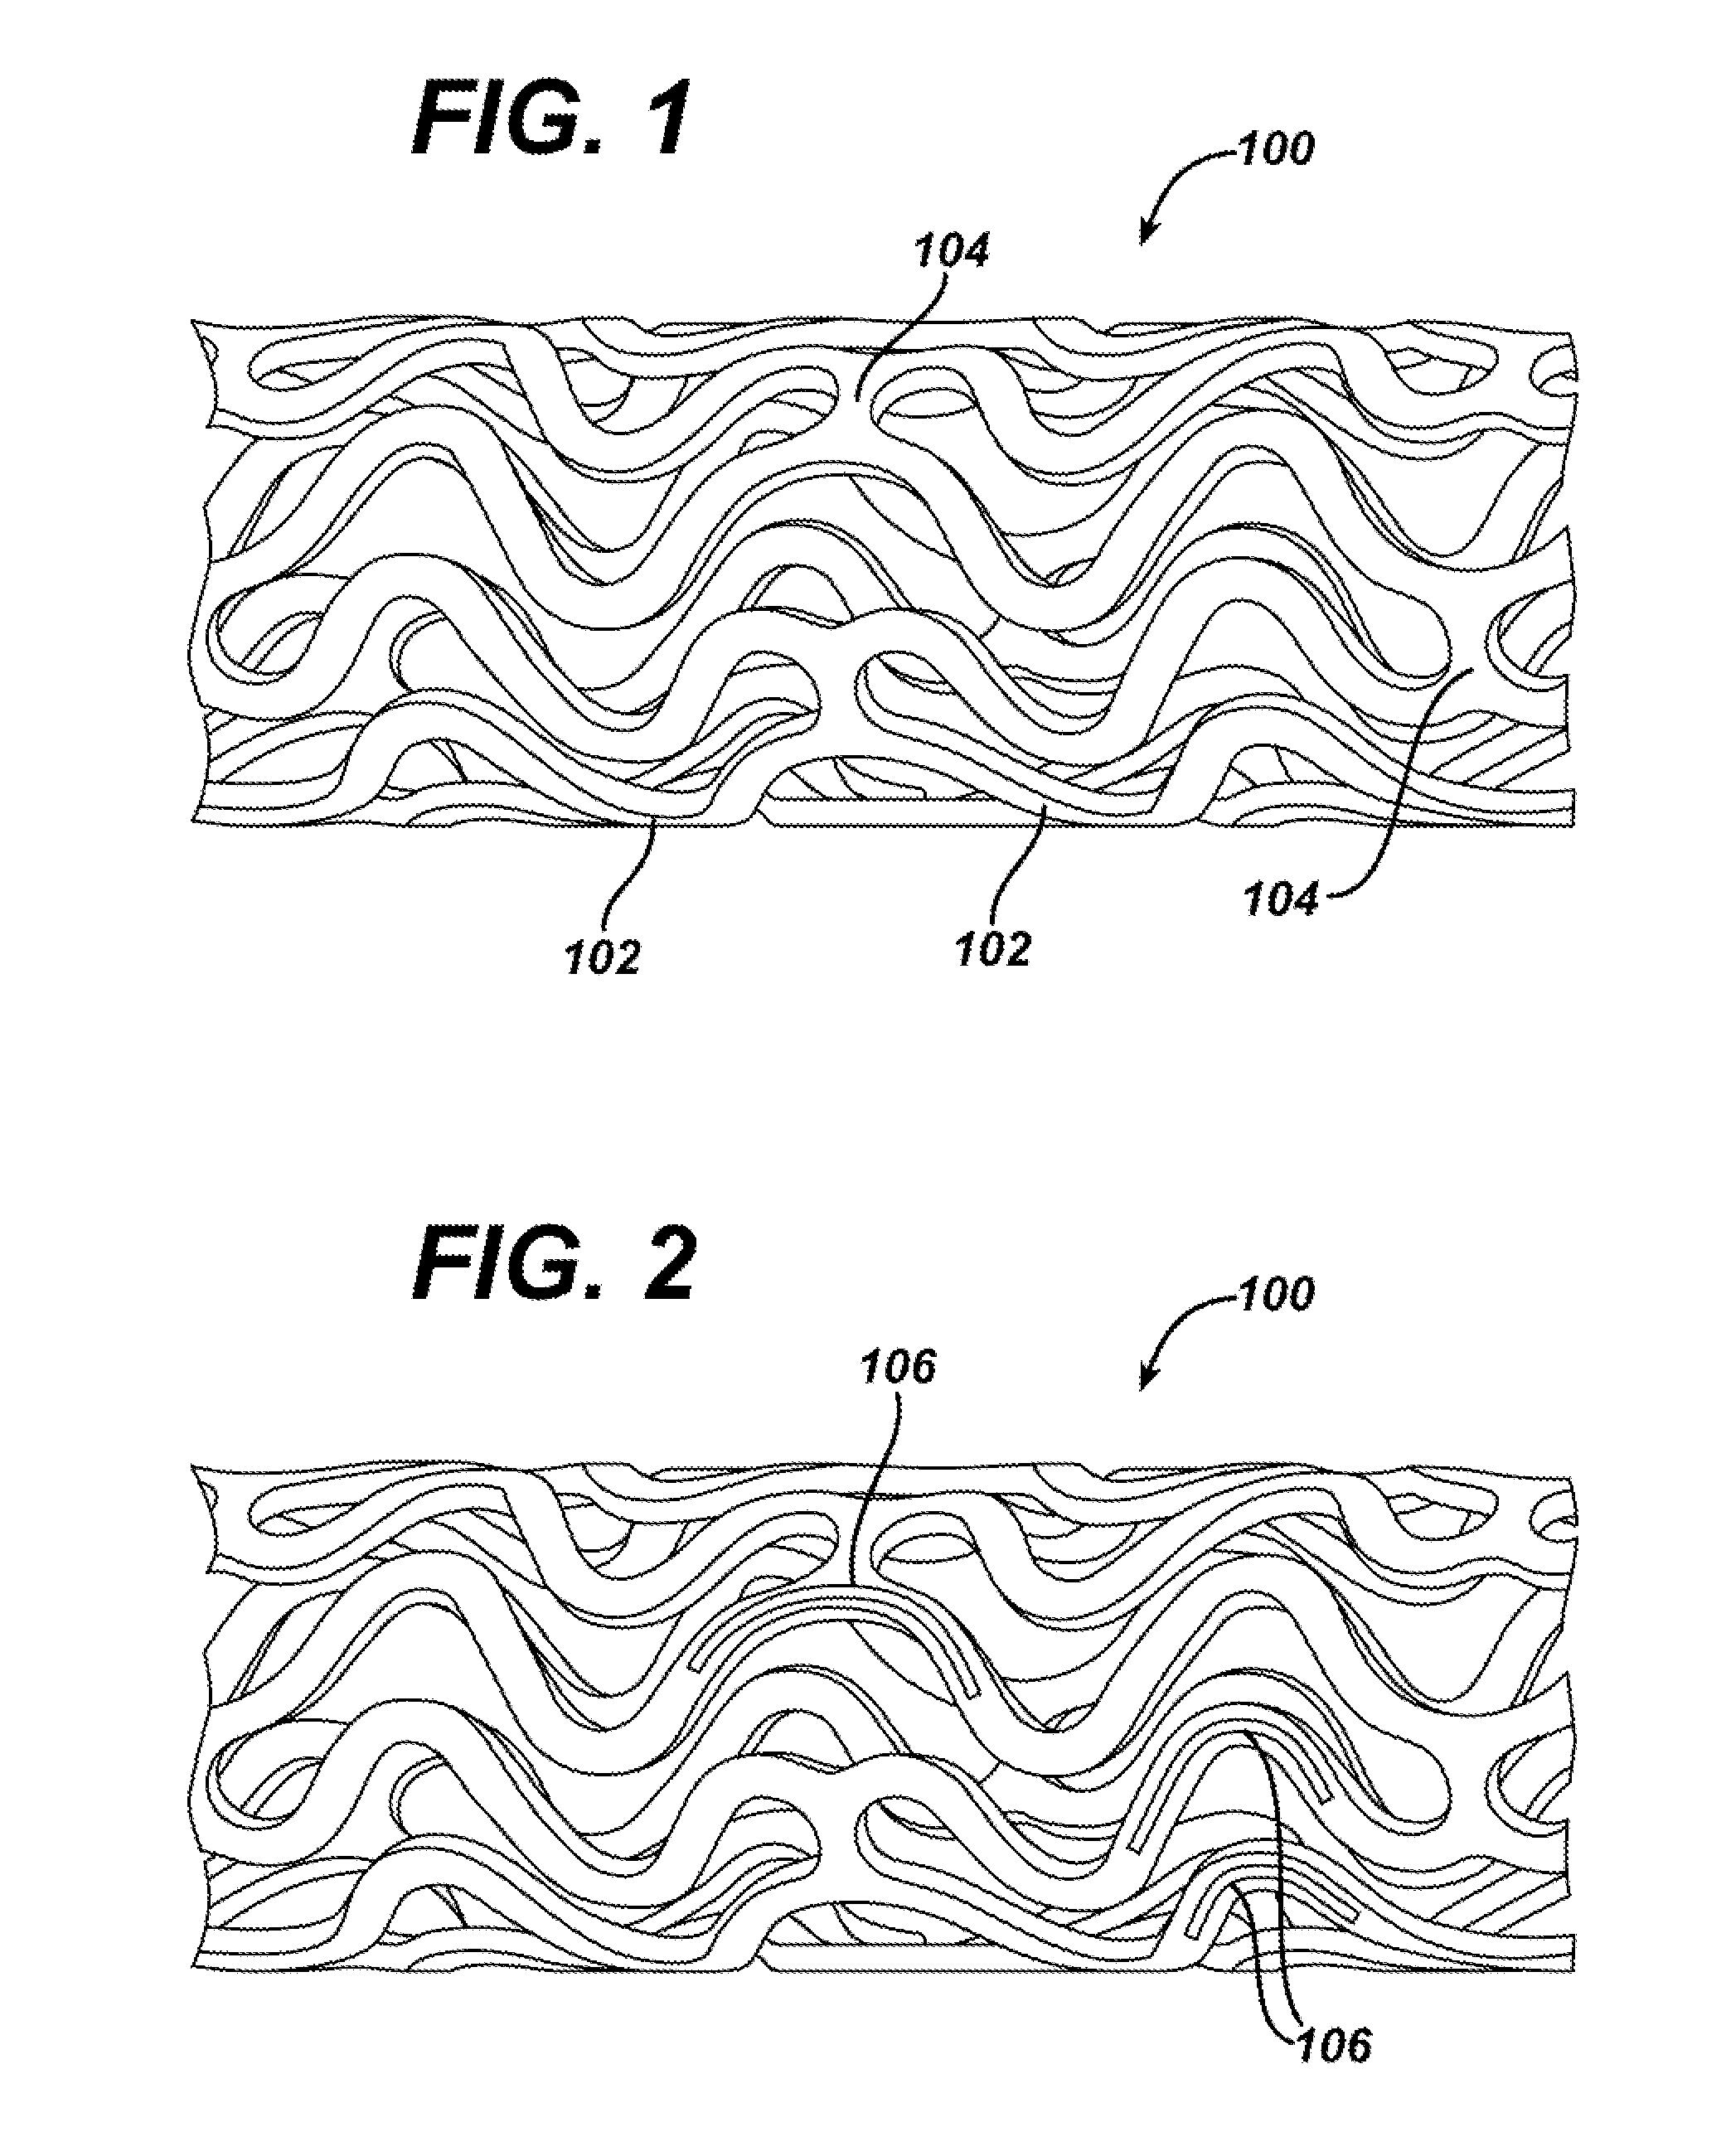 Device for local and/or regional delivery employing liquid formulations of therapeutic agents